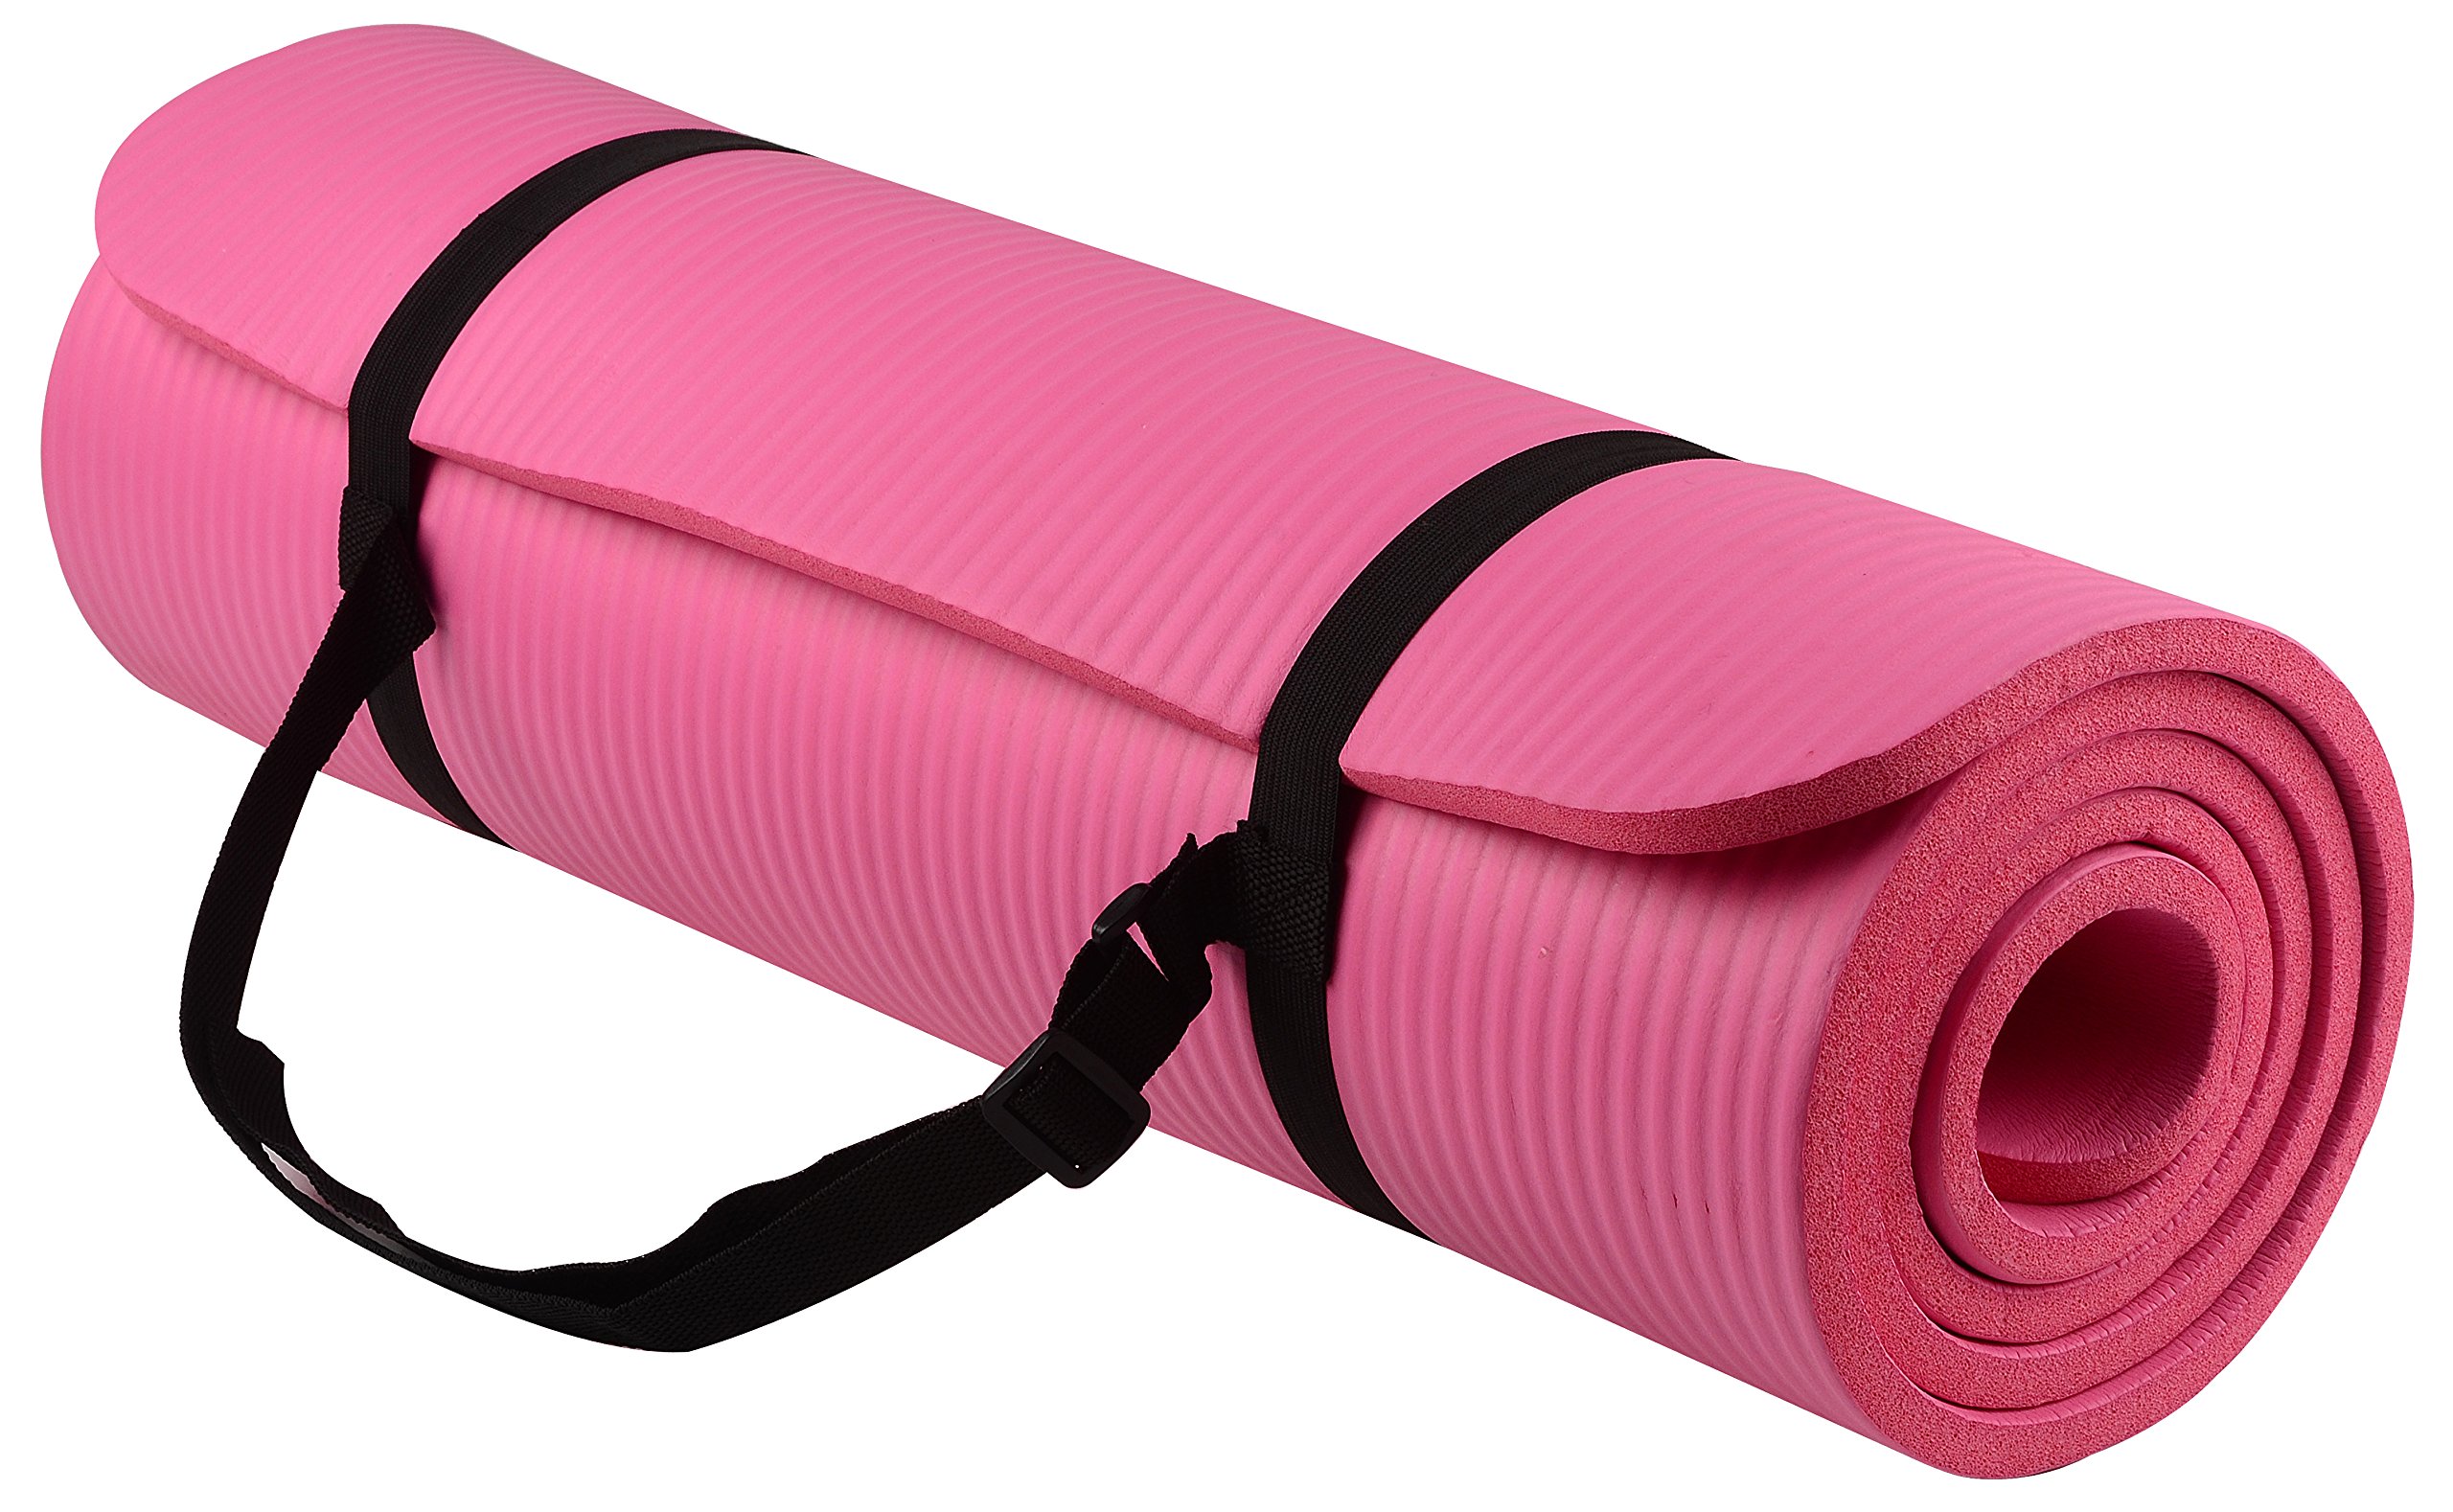 BalanceFrom All Purpose 1/2-Inch Extra Thick High Density Anti-Tear Exercise Yoga Mat with Carrying Strap with Optional Yoga Blocks